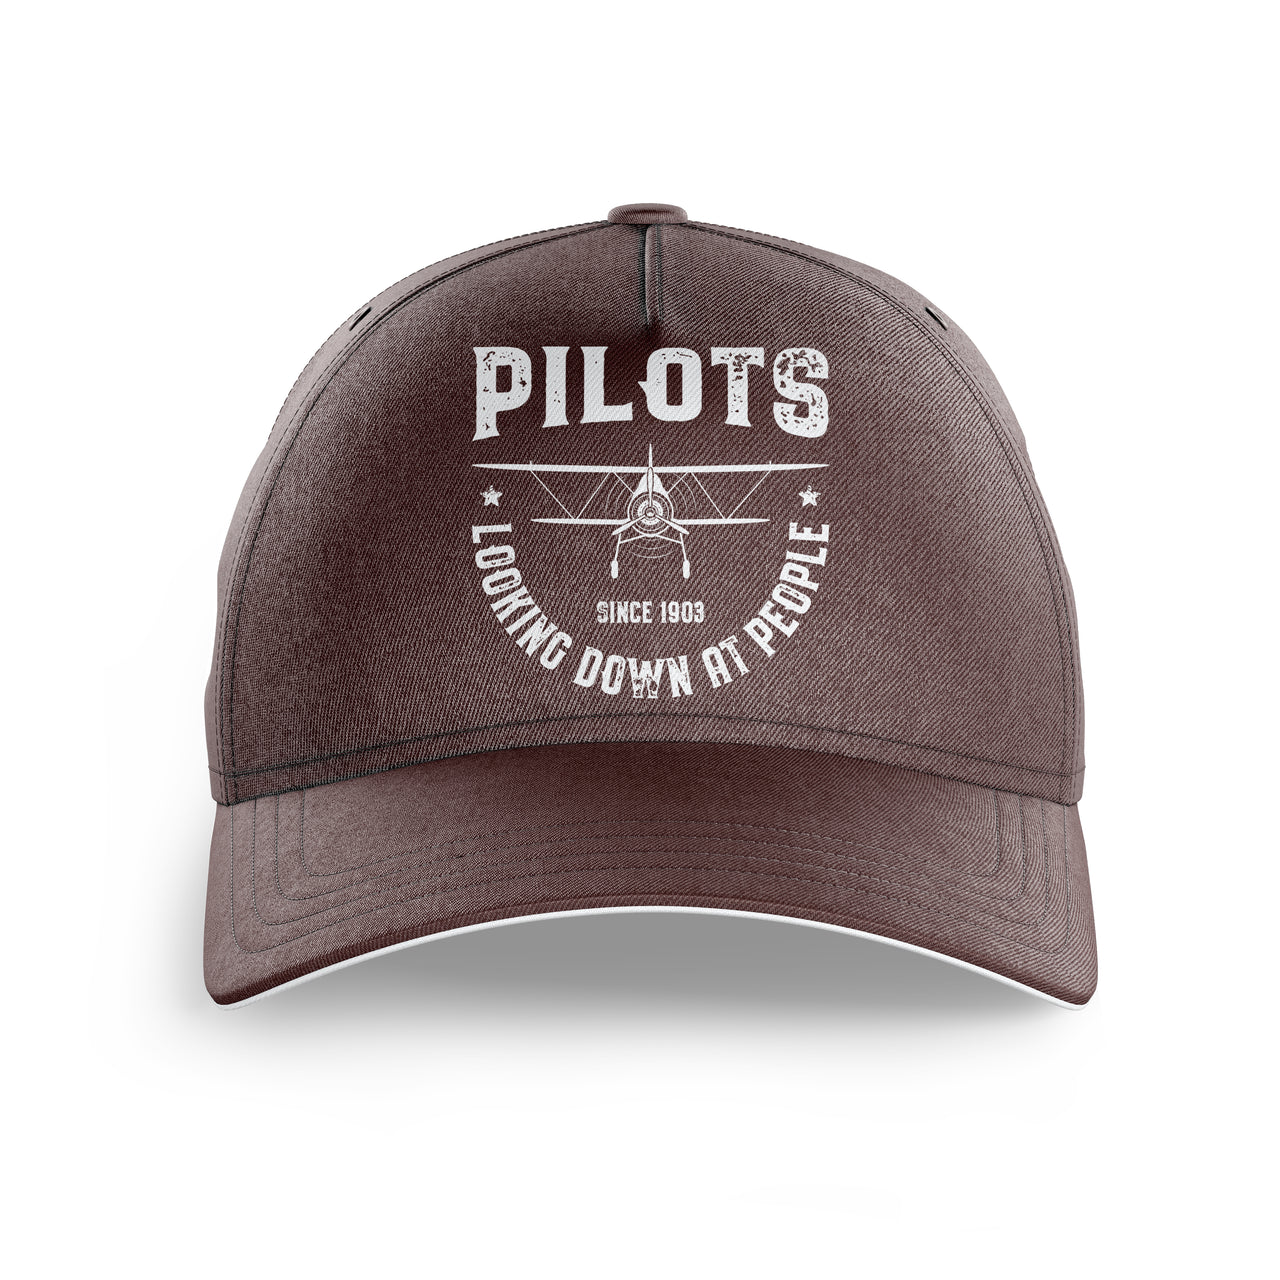 Pilots Looking Down at People Since 1903 Printed Hats